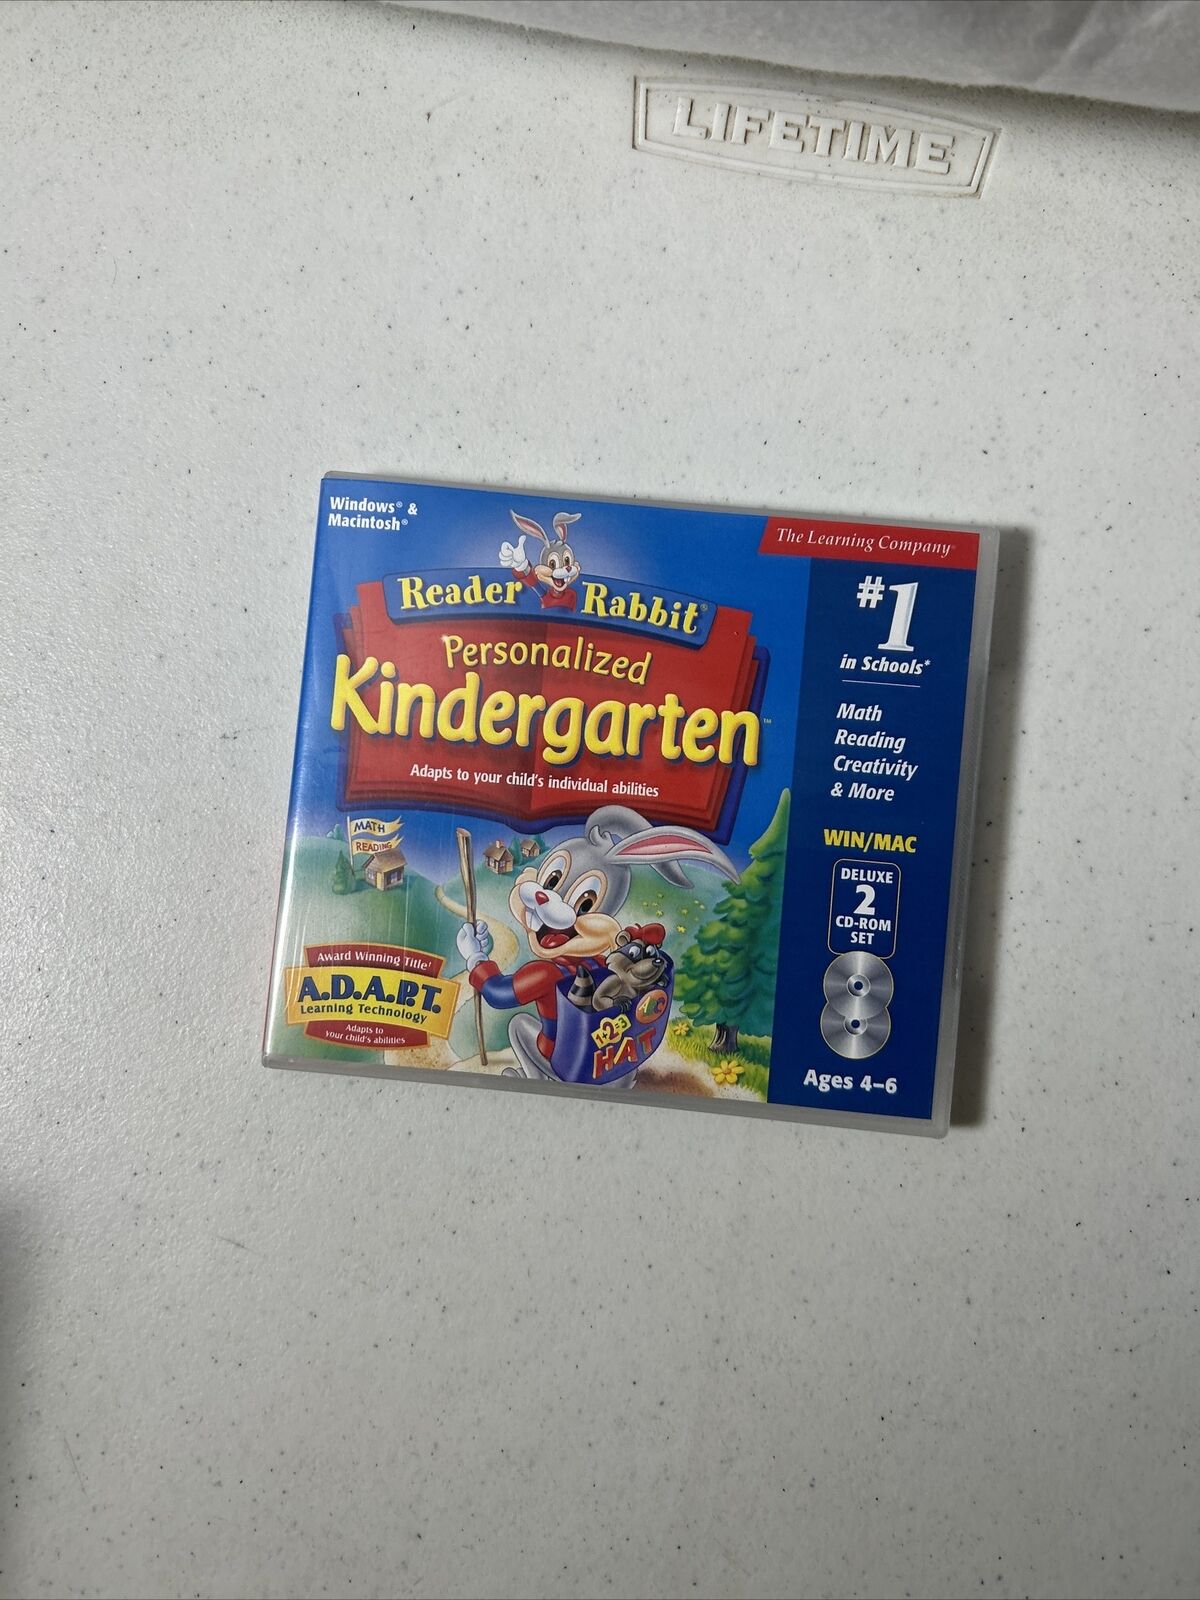 The Learning Company Reader Rabbit S Personalized Kindergarten CD